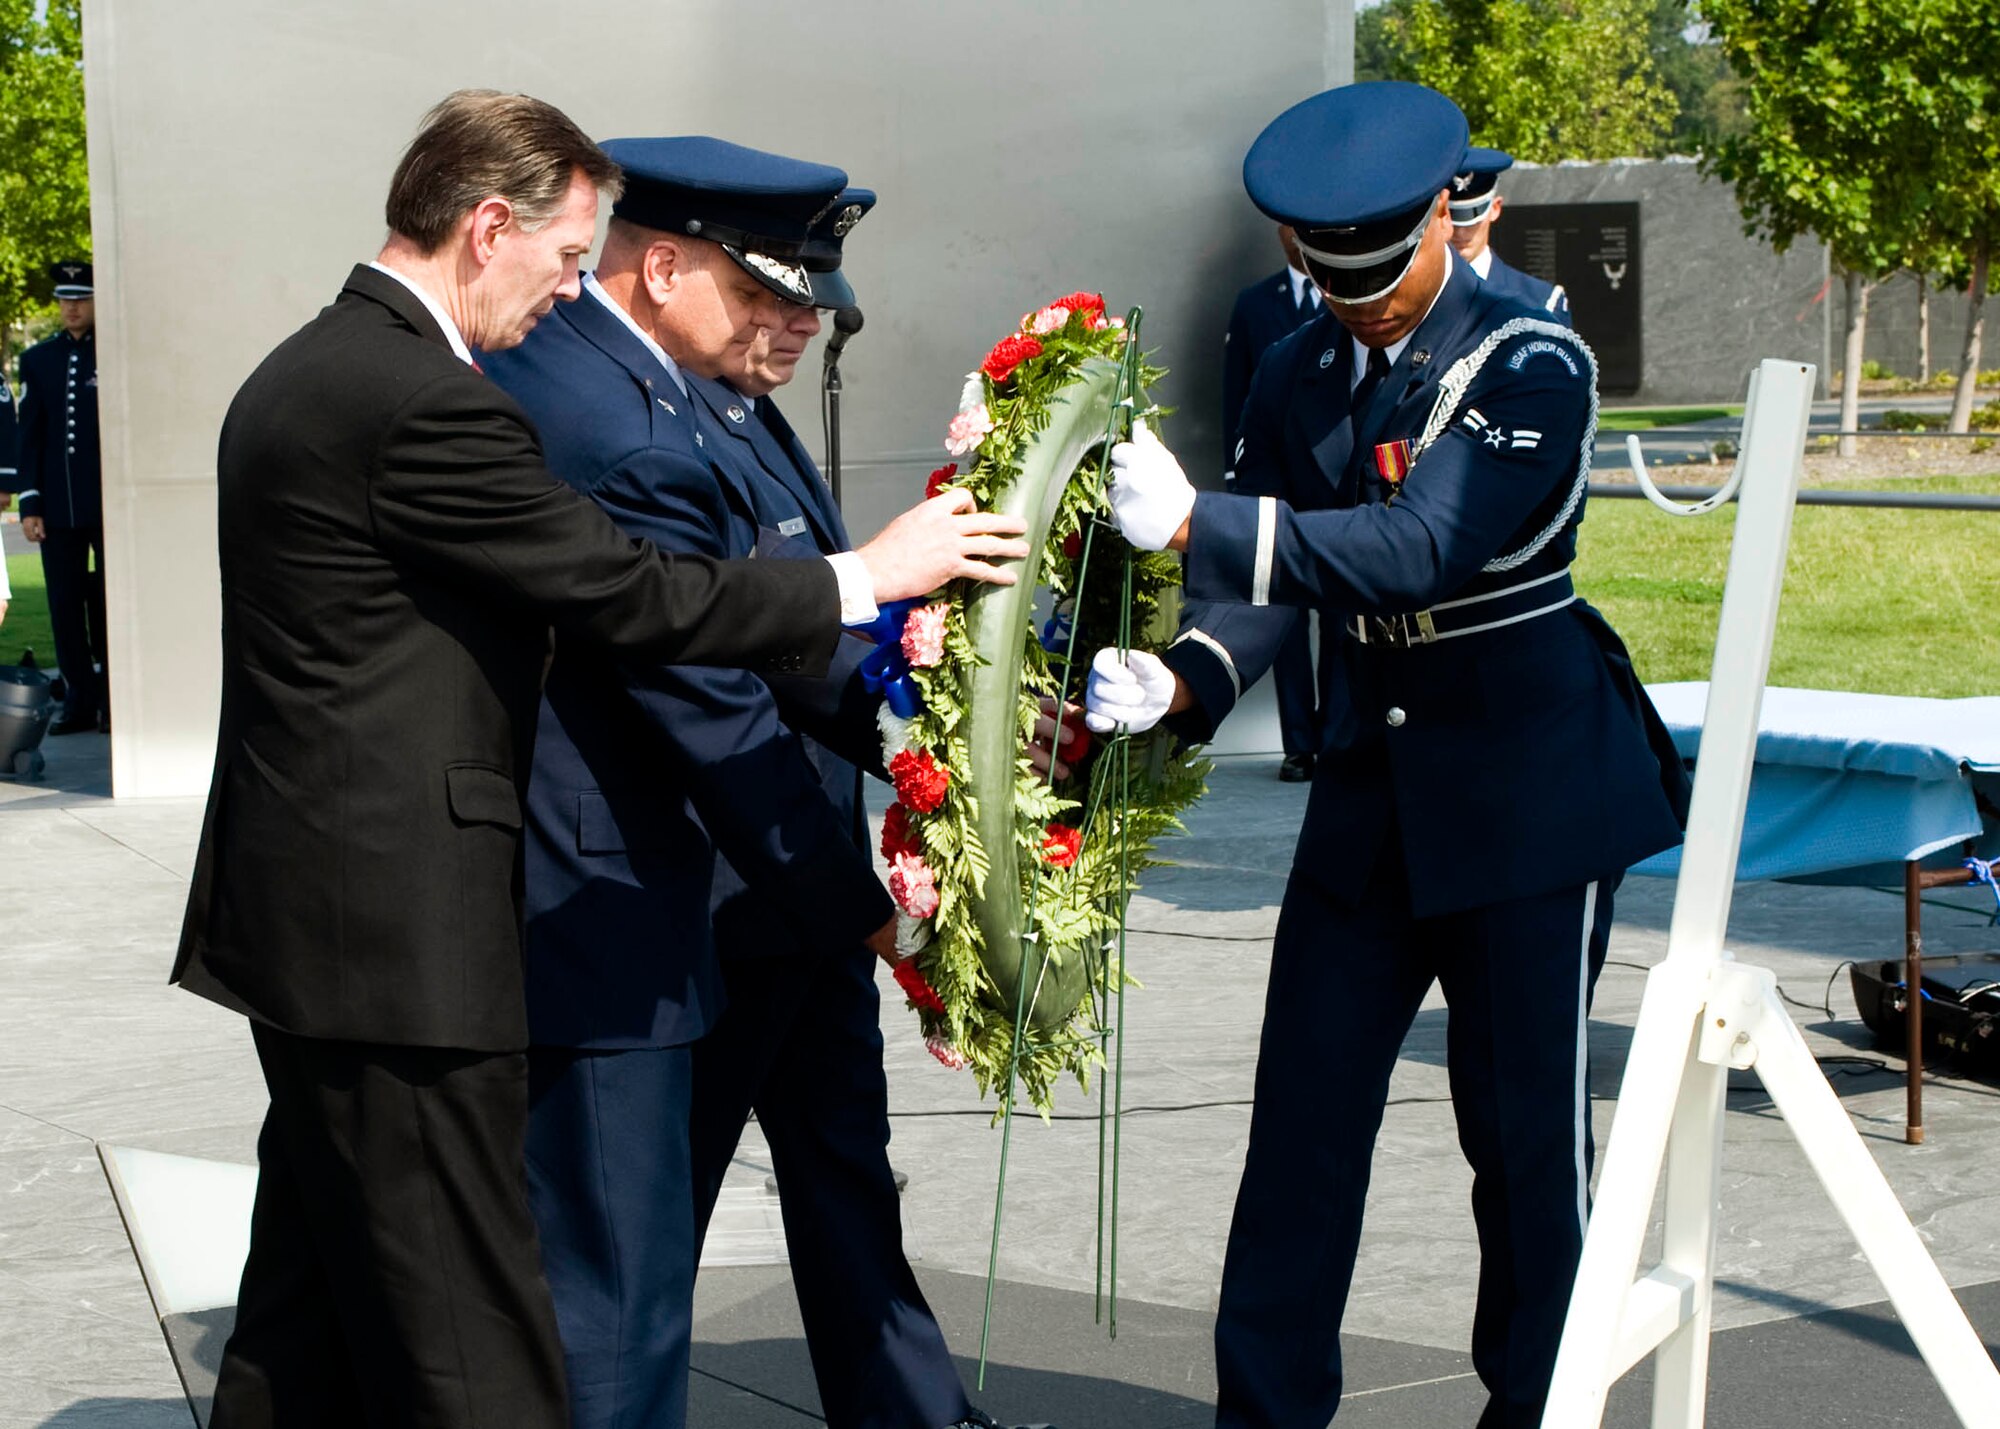 In observance of the 60th Anniversary of the Air Force Office of Special Investigations a wreath is placed at the Air Force Memorial Aug. 1. Positioning the wreath are (l to r) Mr. Douglas Thomas, AFOSI Executive Director, Brig. Gen. Dana Simmons, AFOSI commander, Command Chief Master Sgt. Chris Redmond, AFOSI Command Chief, and an Airman from the Air Force Honor Guard. (U.S. Air Force photo/Mike Hastings)